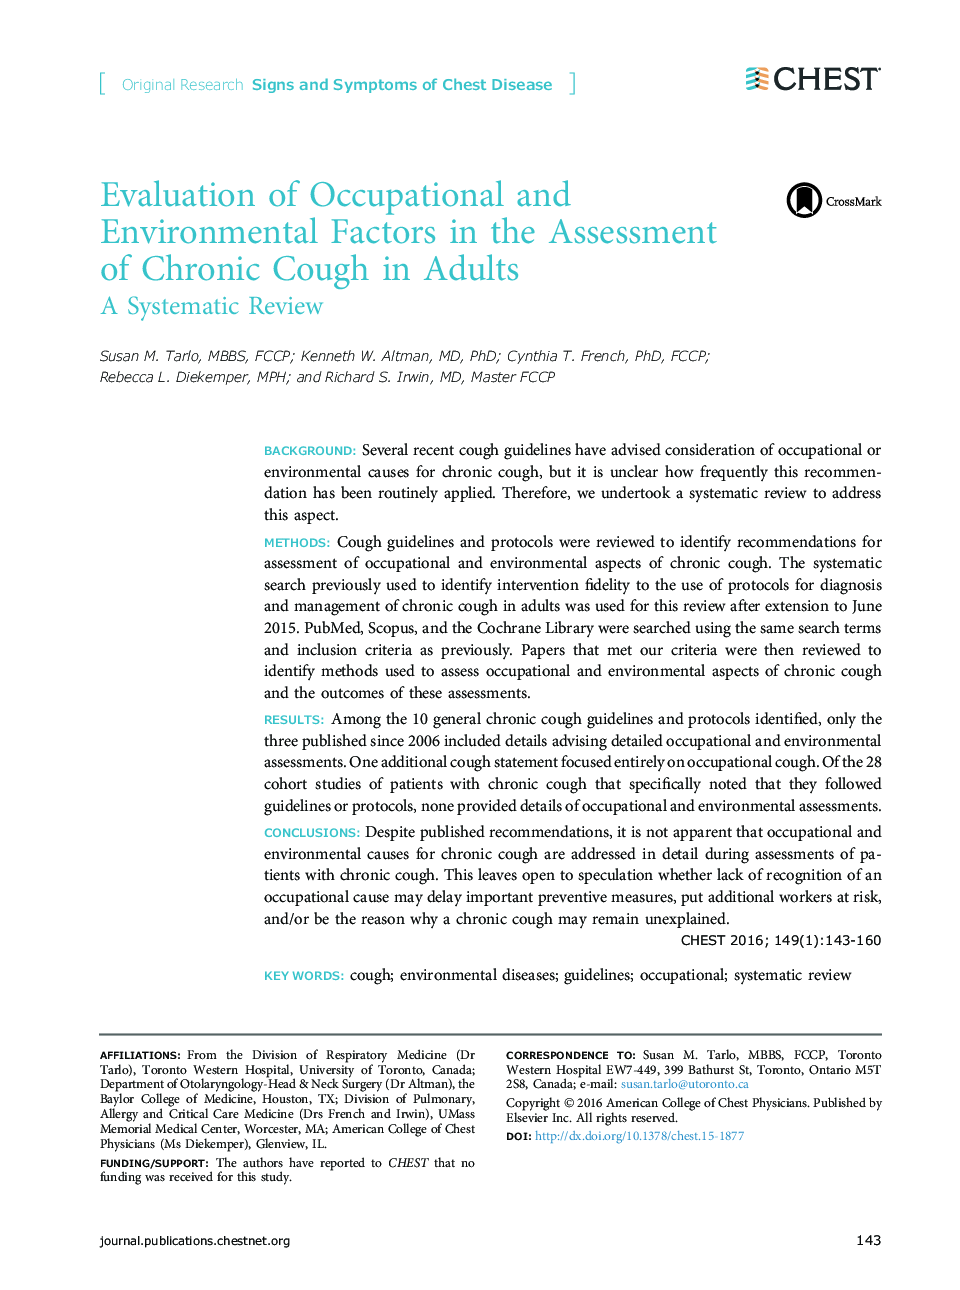 Evaluation of Occupational and Environmental Factors in the Assessment of Chronic Cough in Adults